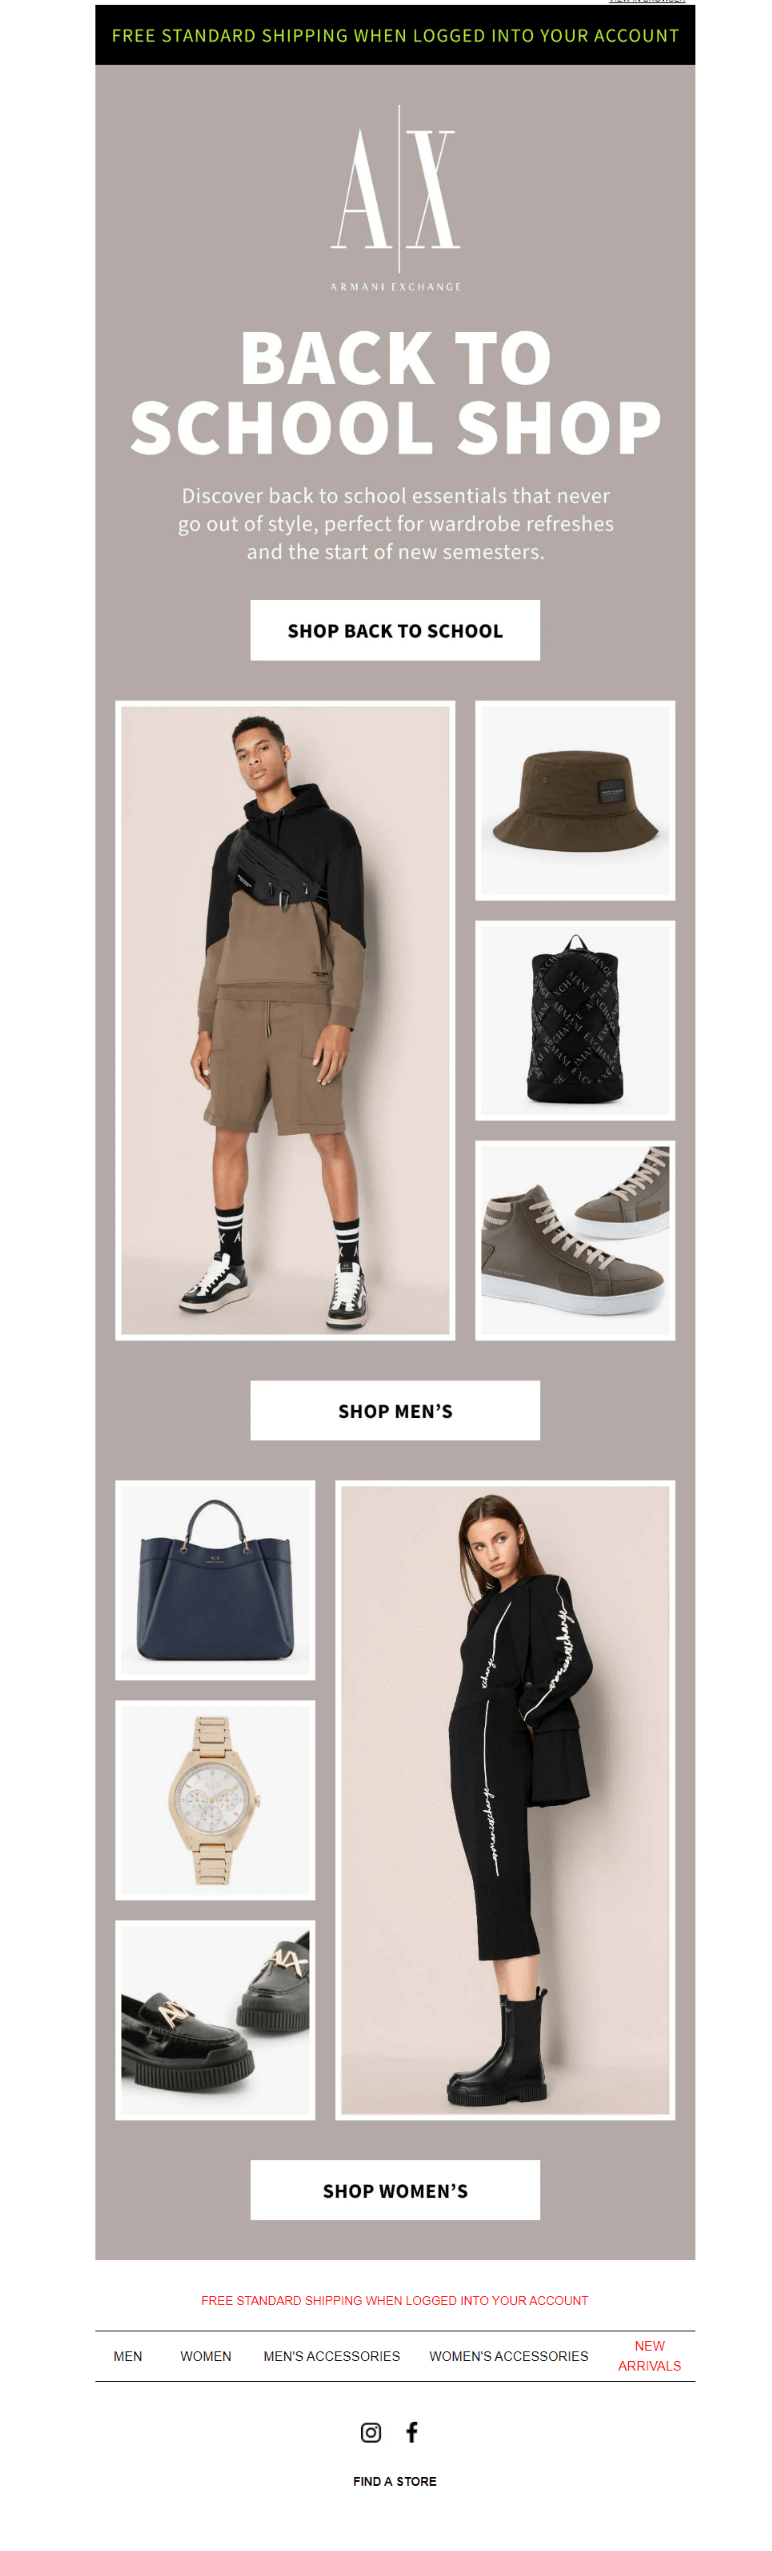 Back to school email from Armani Exchange that promotes a new collection that never goes out of style and is perfect for refreshing the wardrobe